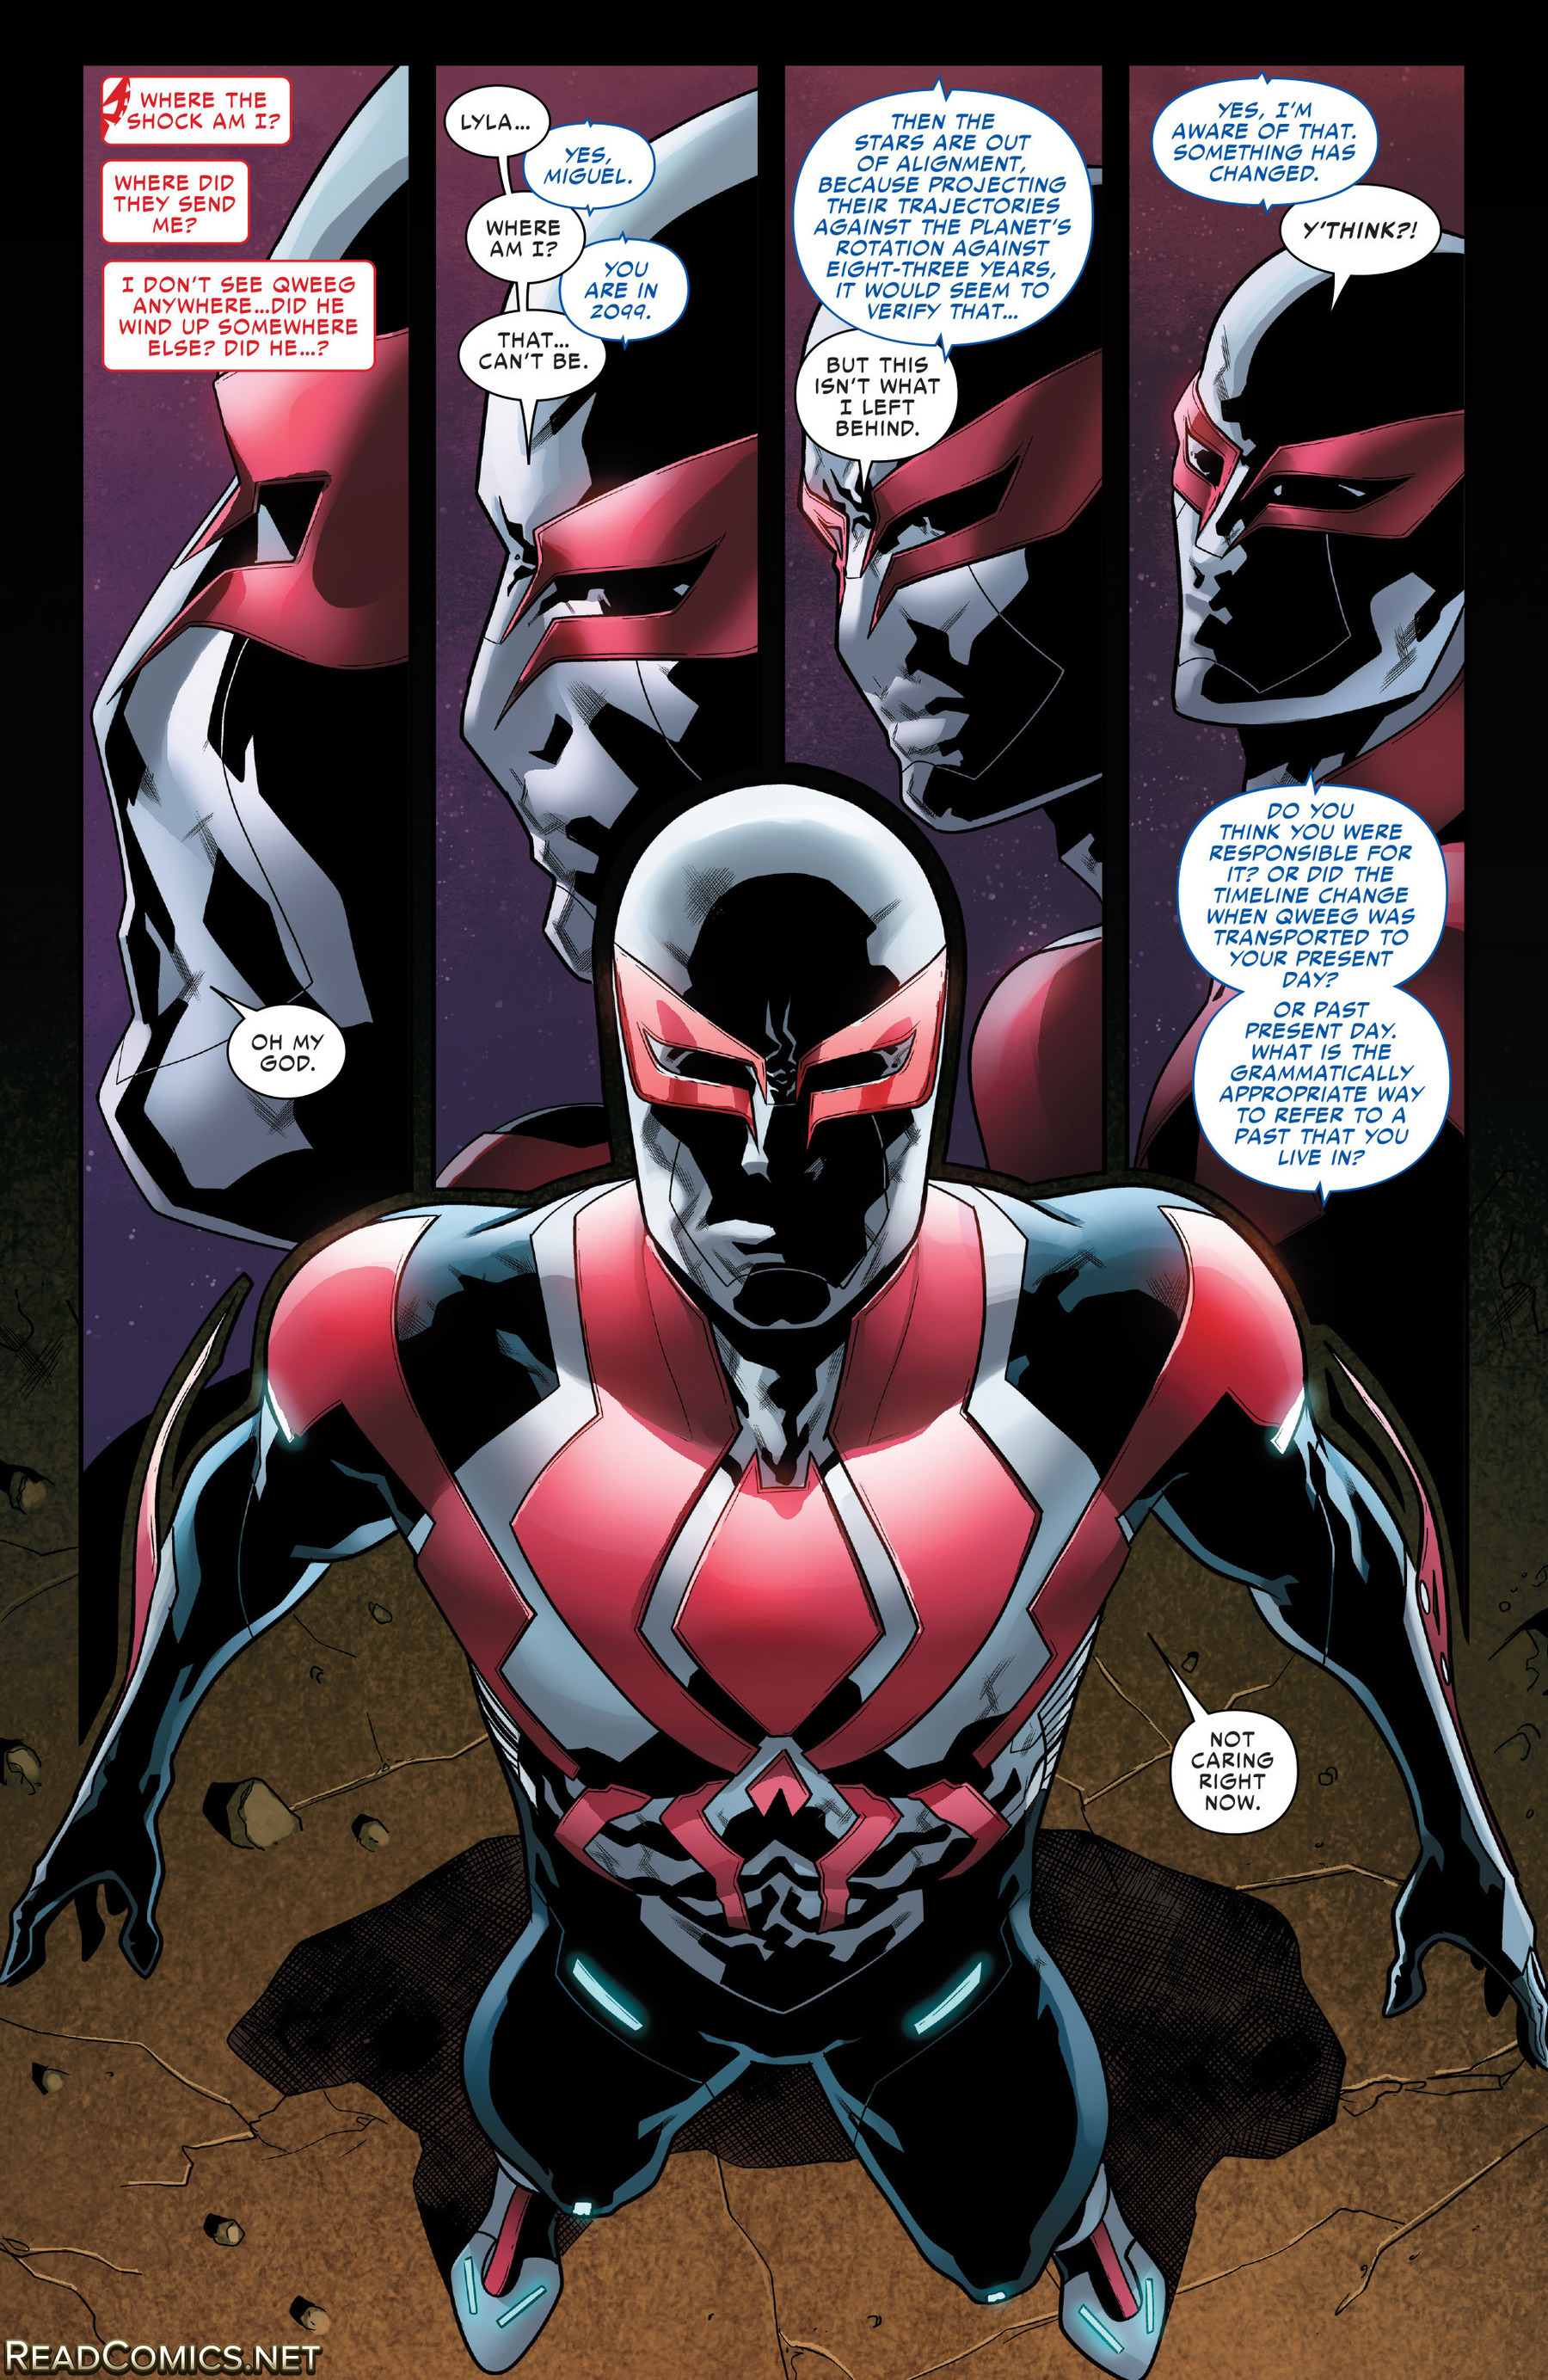 Spider-Man 2099 (2015-): Chapter 10 - Page 2